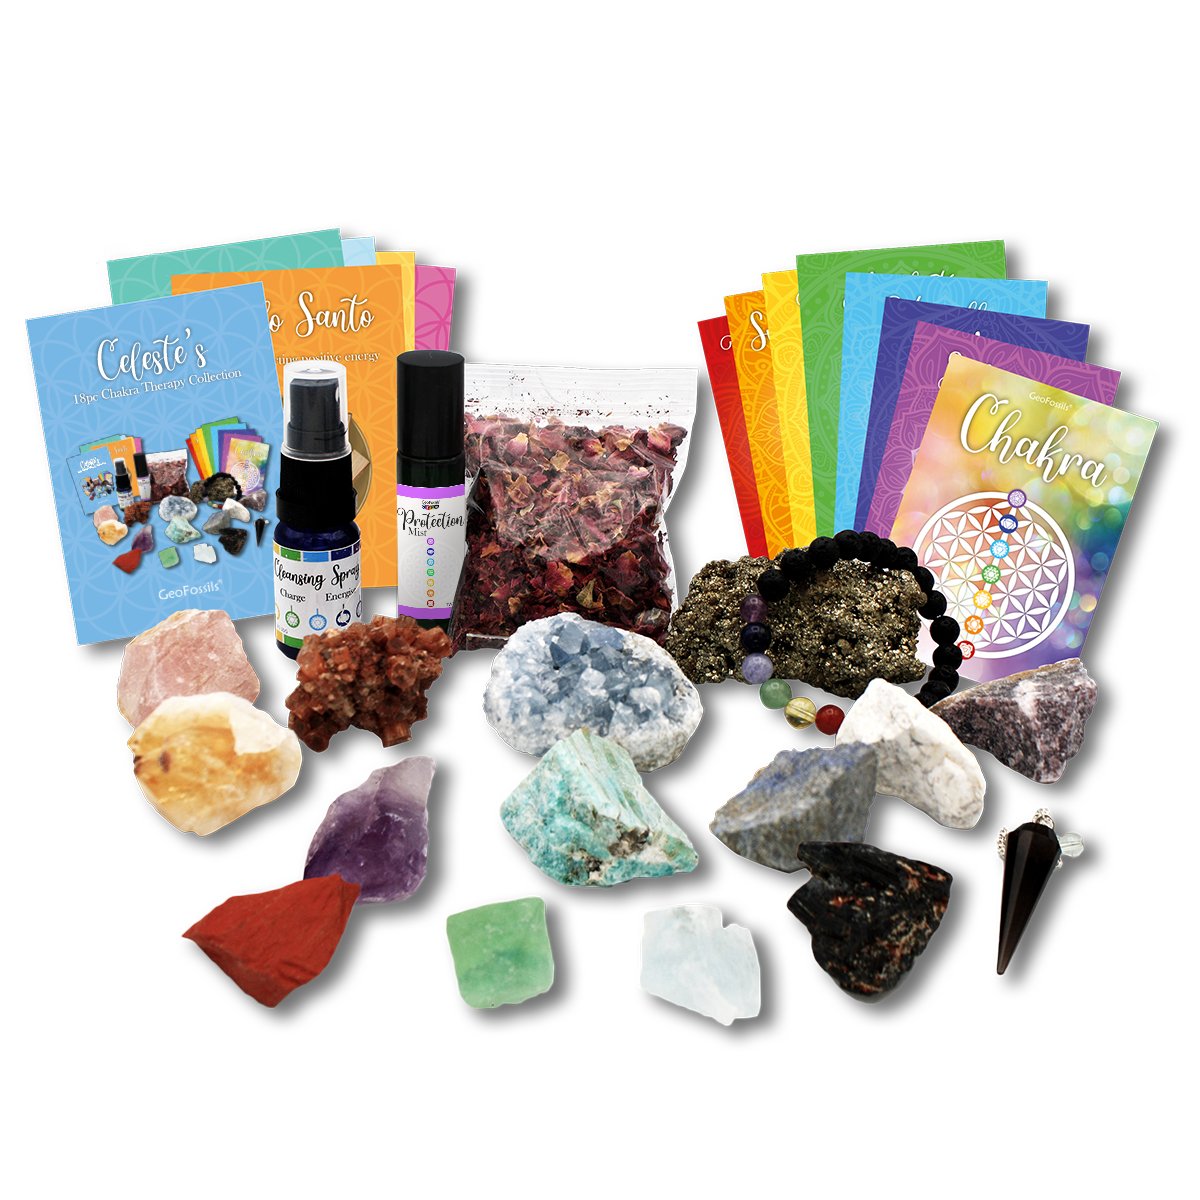 The GeoFossils Crystal Healing Set come with healing crystals, hand blended crystal cleansing spray and metaphysical guide in an organza bag.